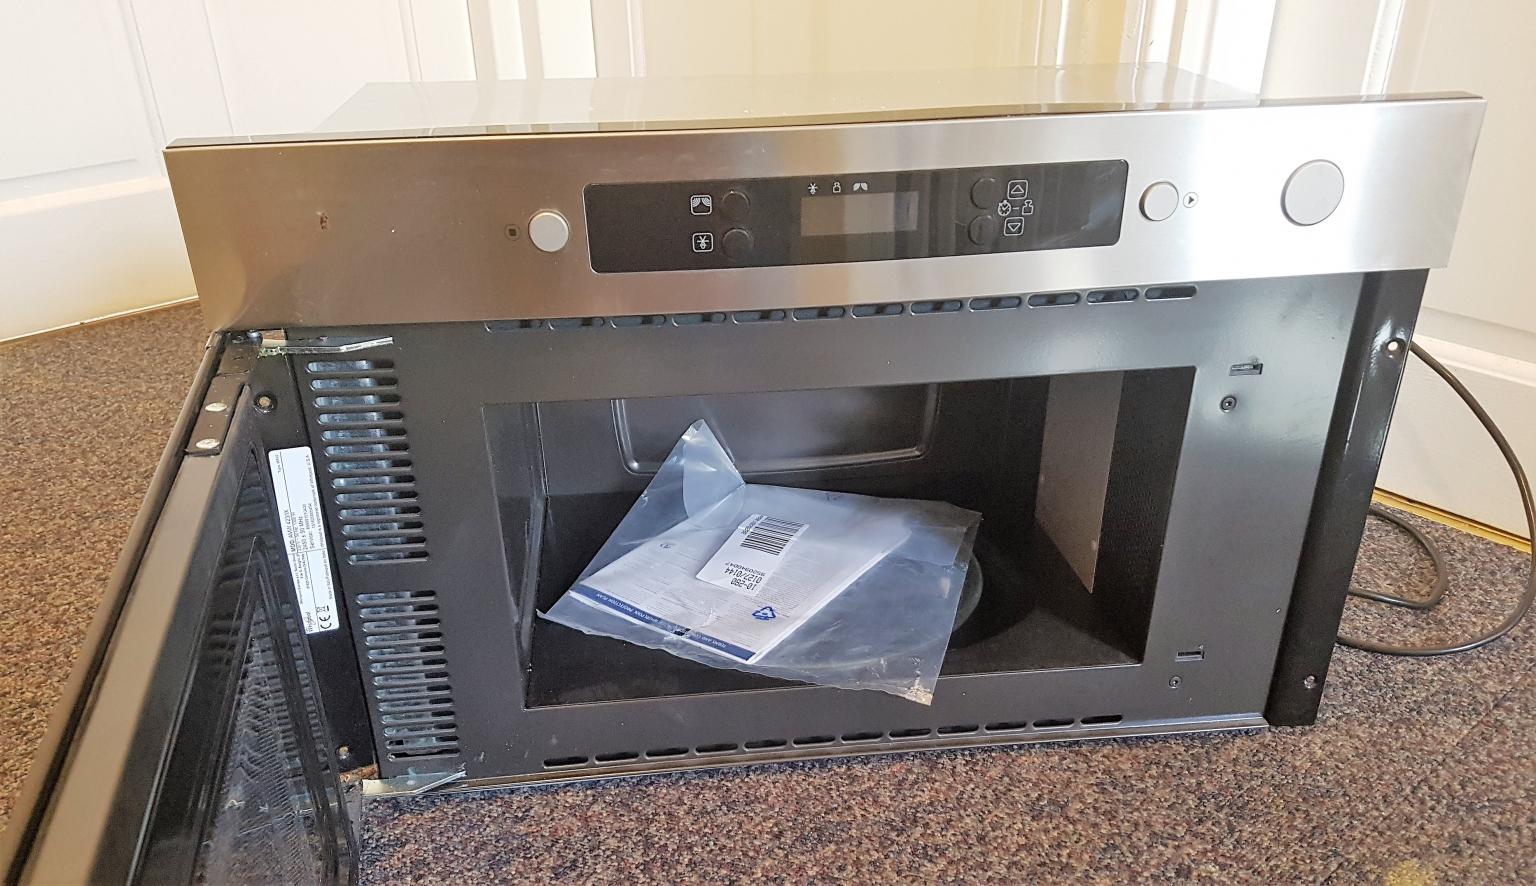 Whirlpool Built-in Microwave For Parts in TW8 London for £40.00 for